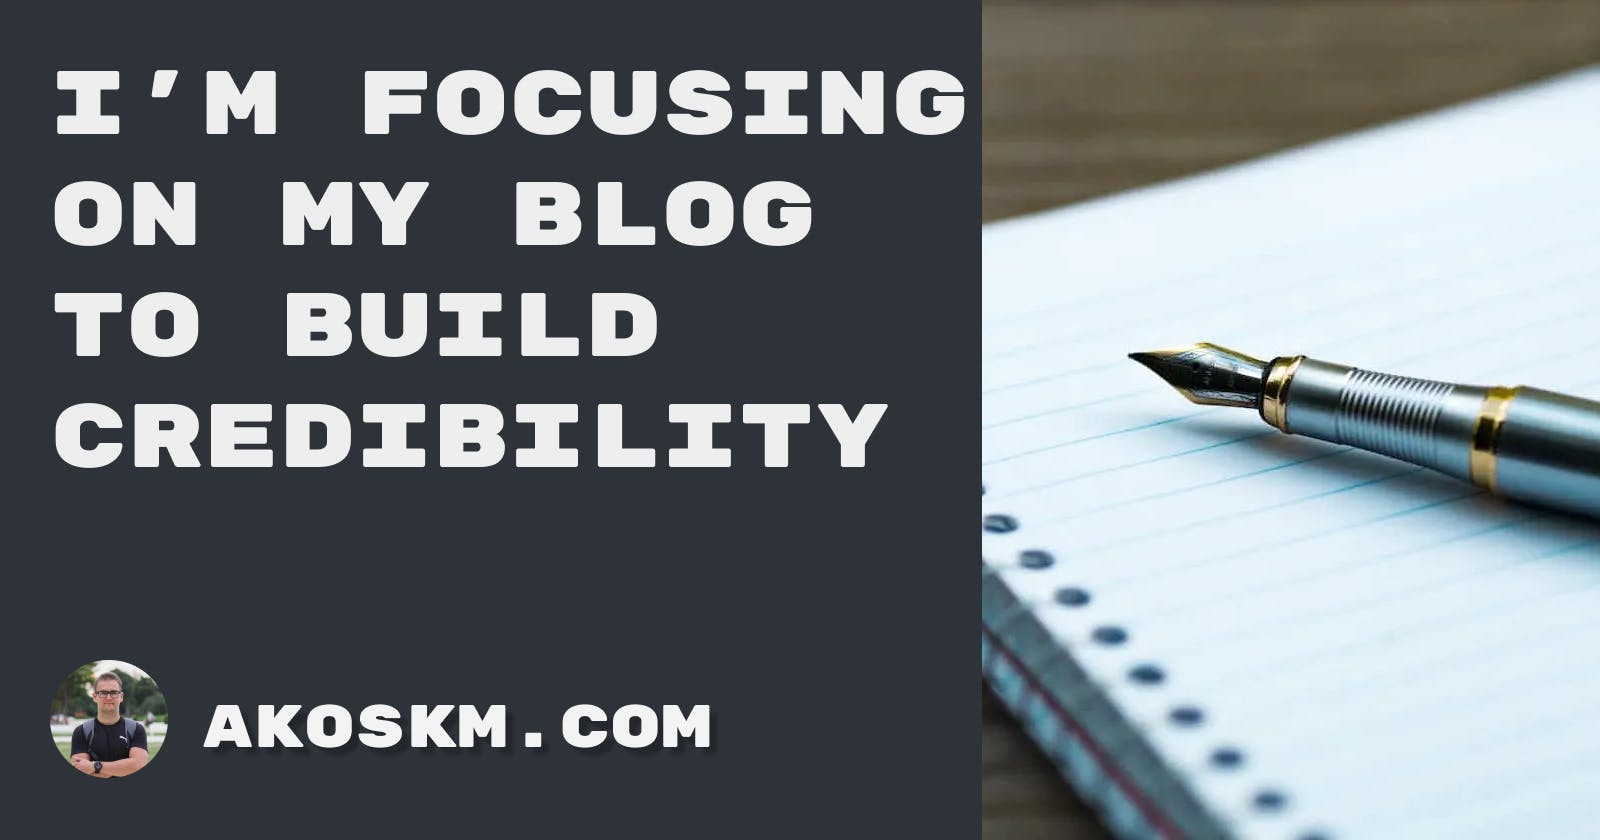 I want to build my blog because that's one of the best ways to gain credibility in my niche